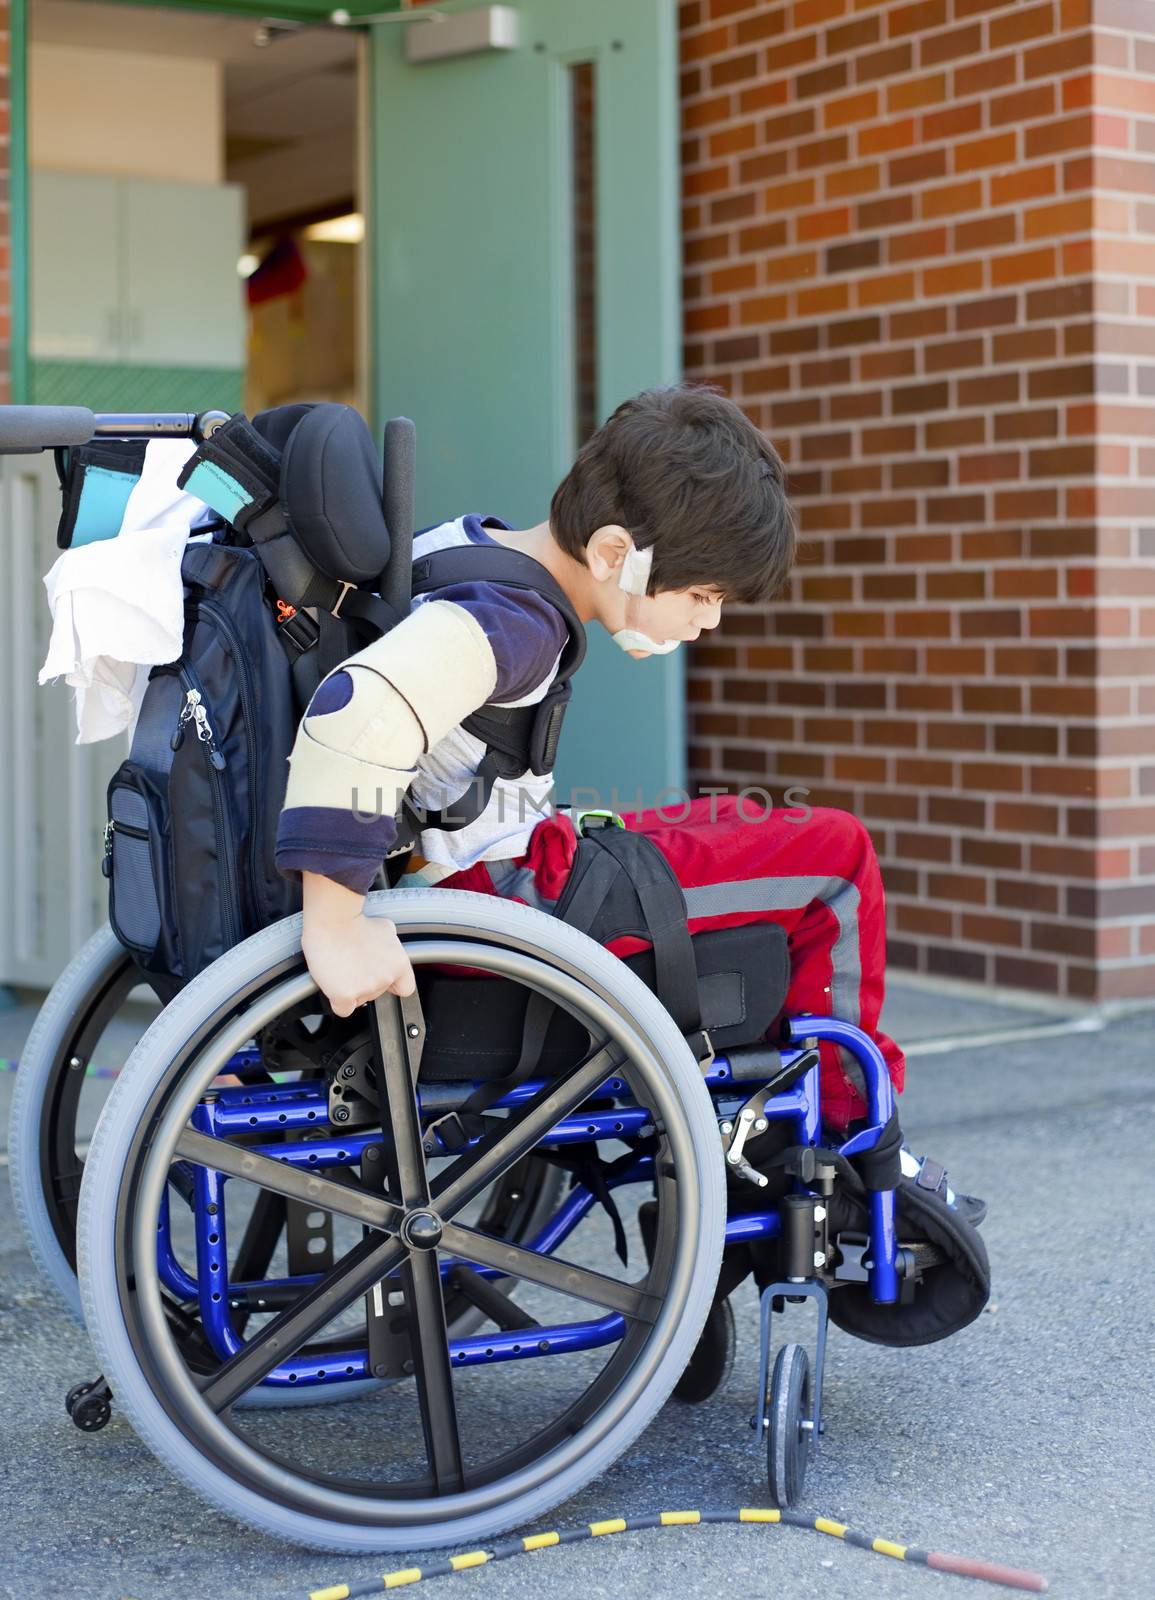 Disabled kindergartener trying to manuever wheelchair on playground at recess